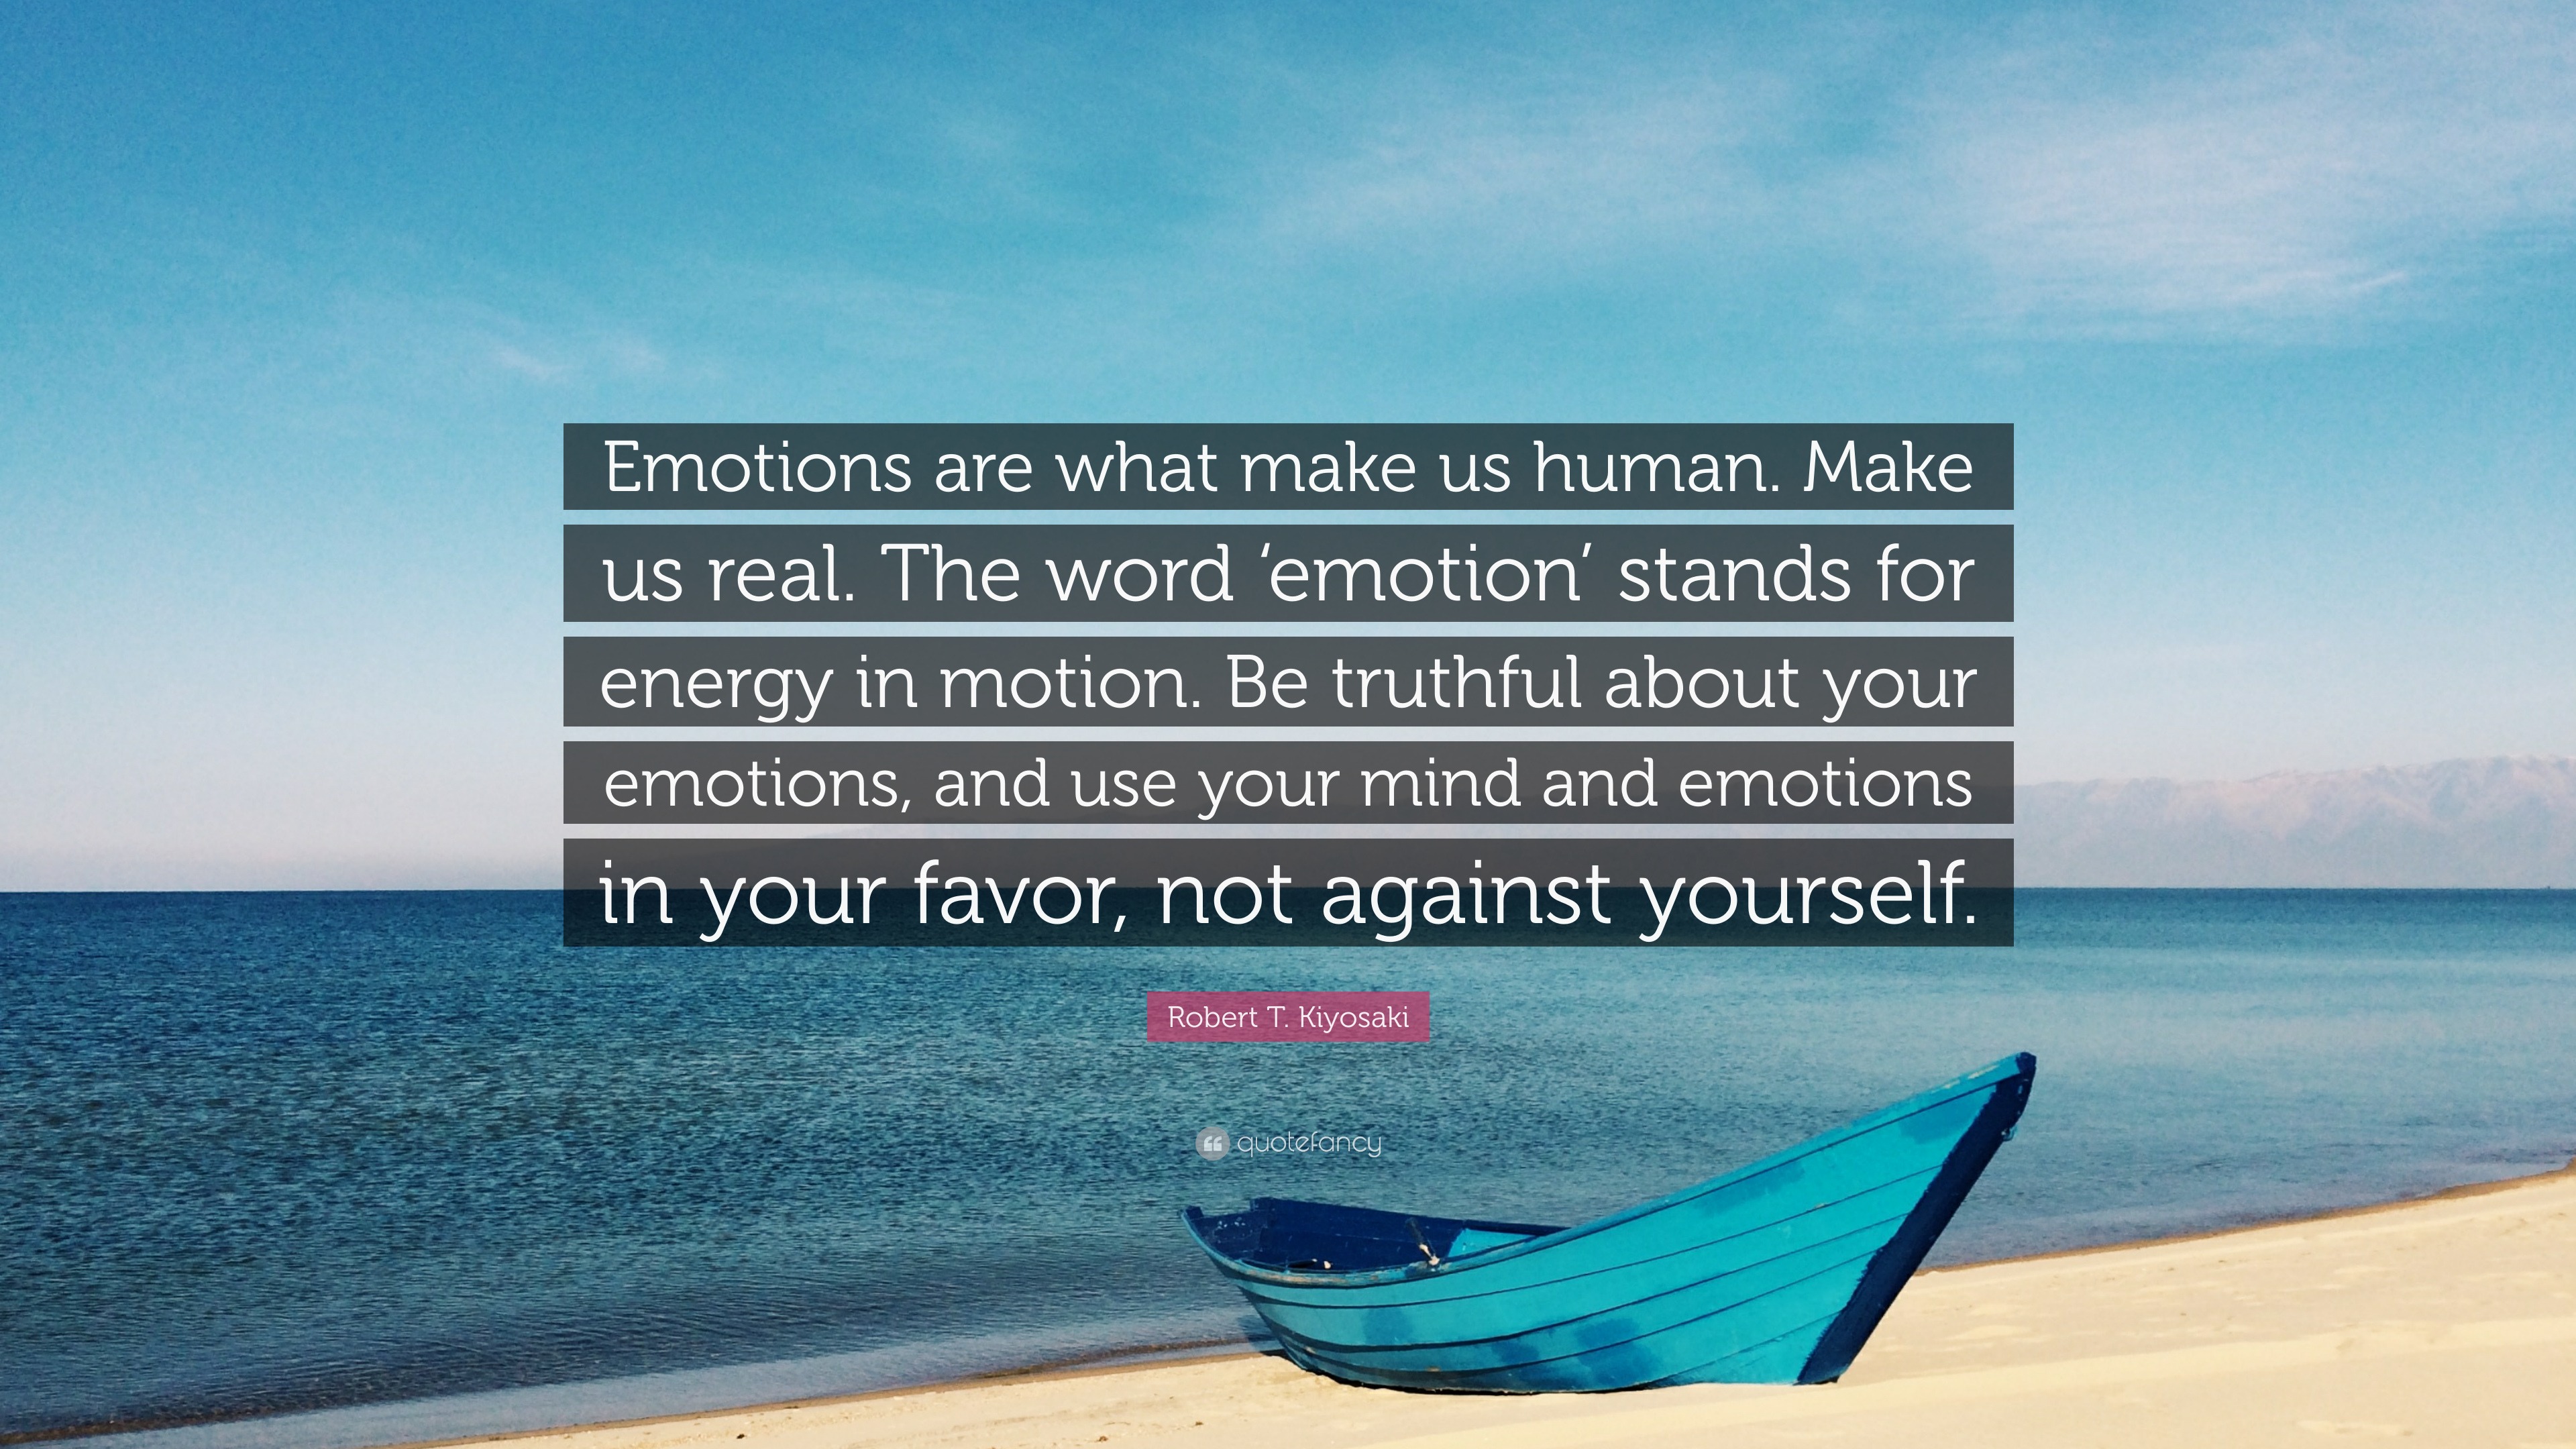 Emotions are what make us human